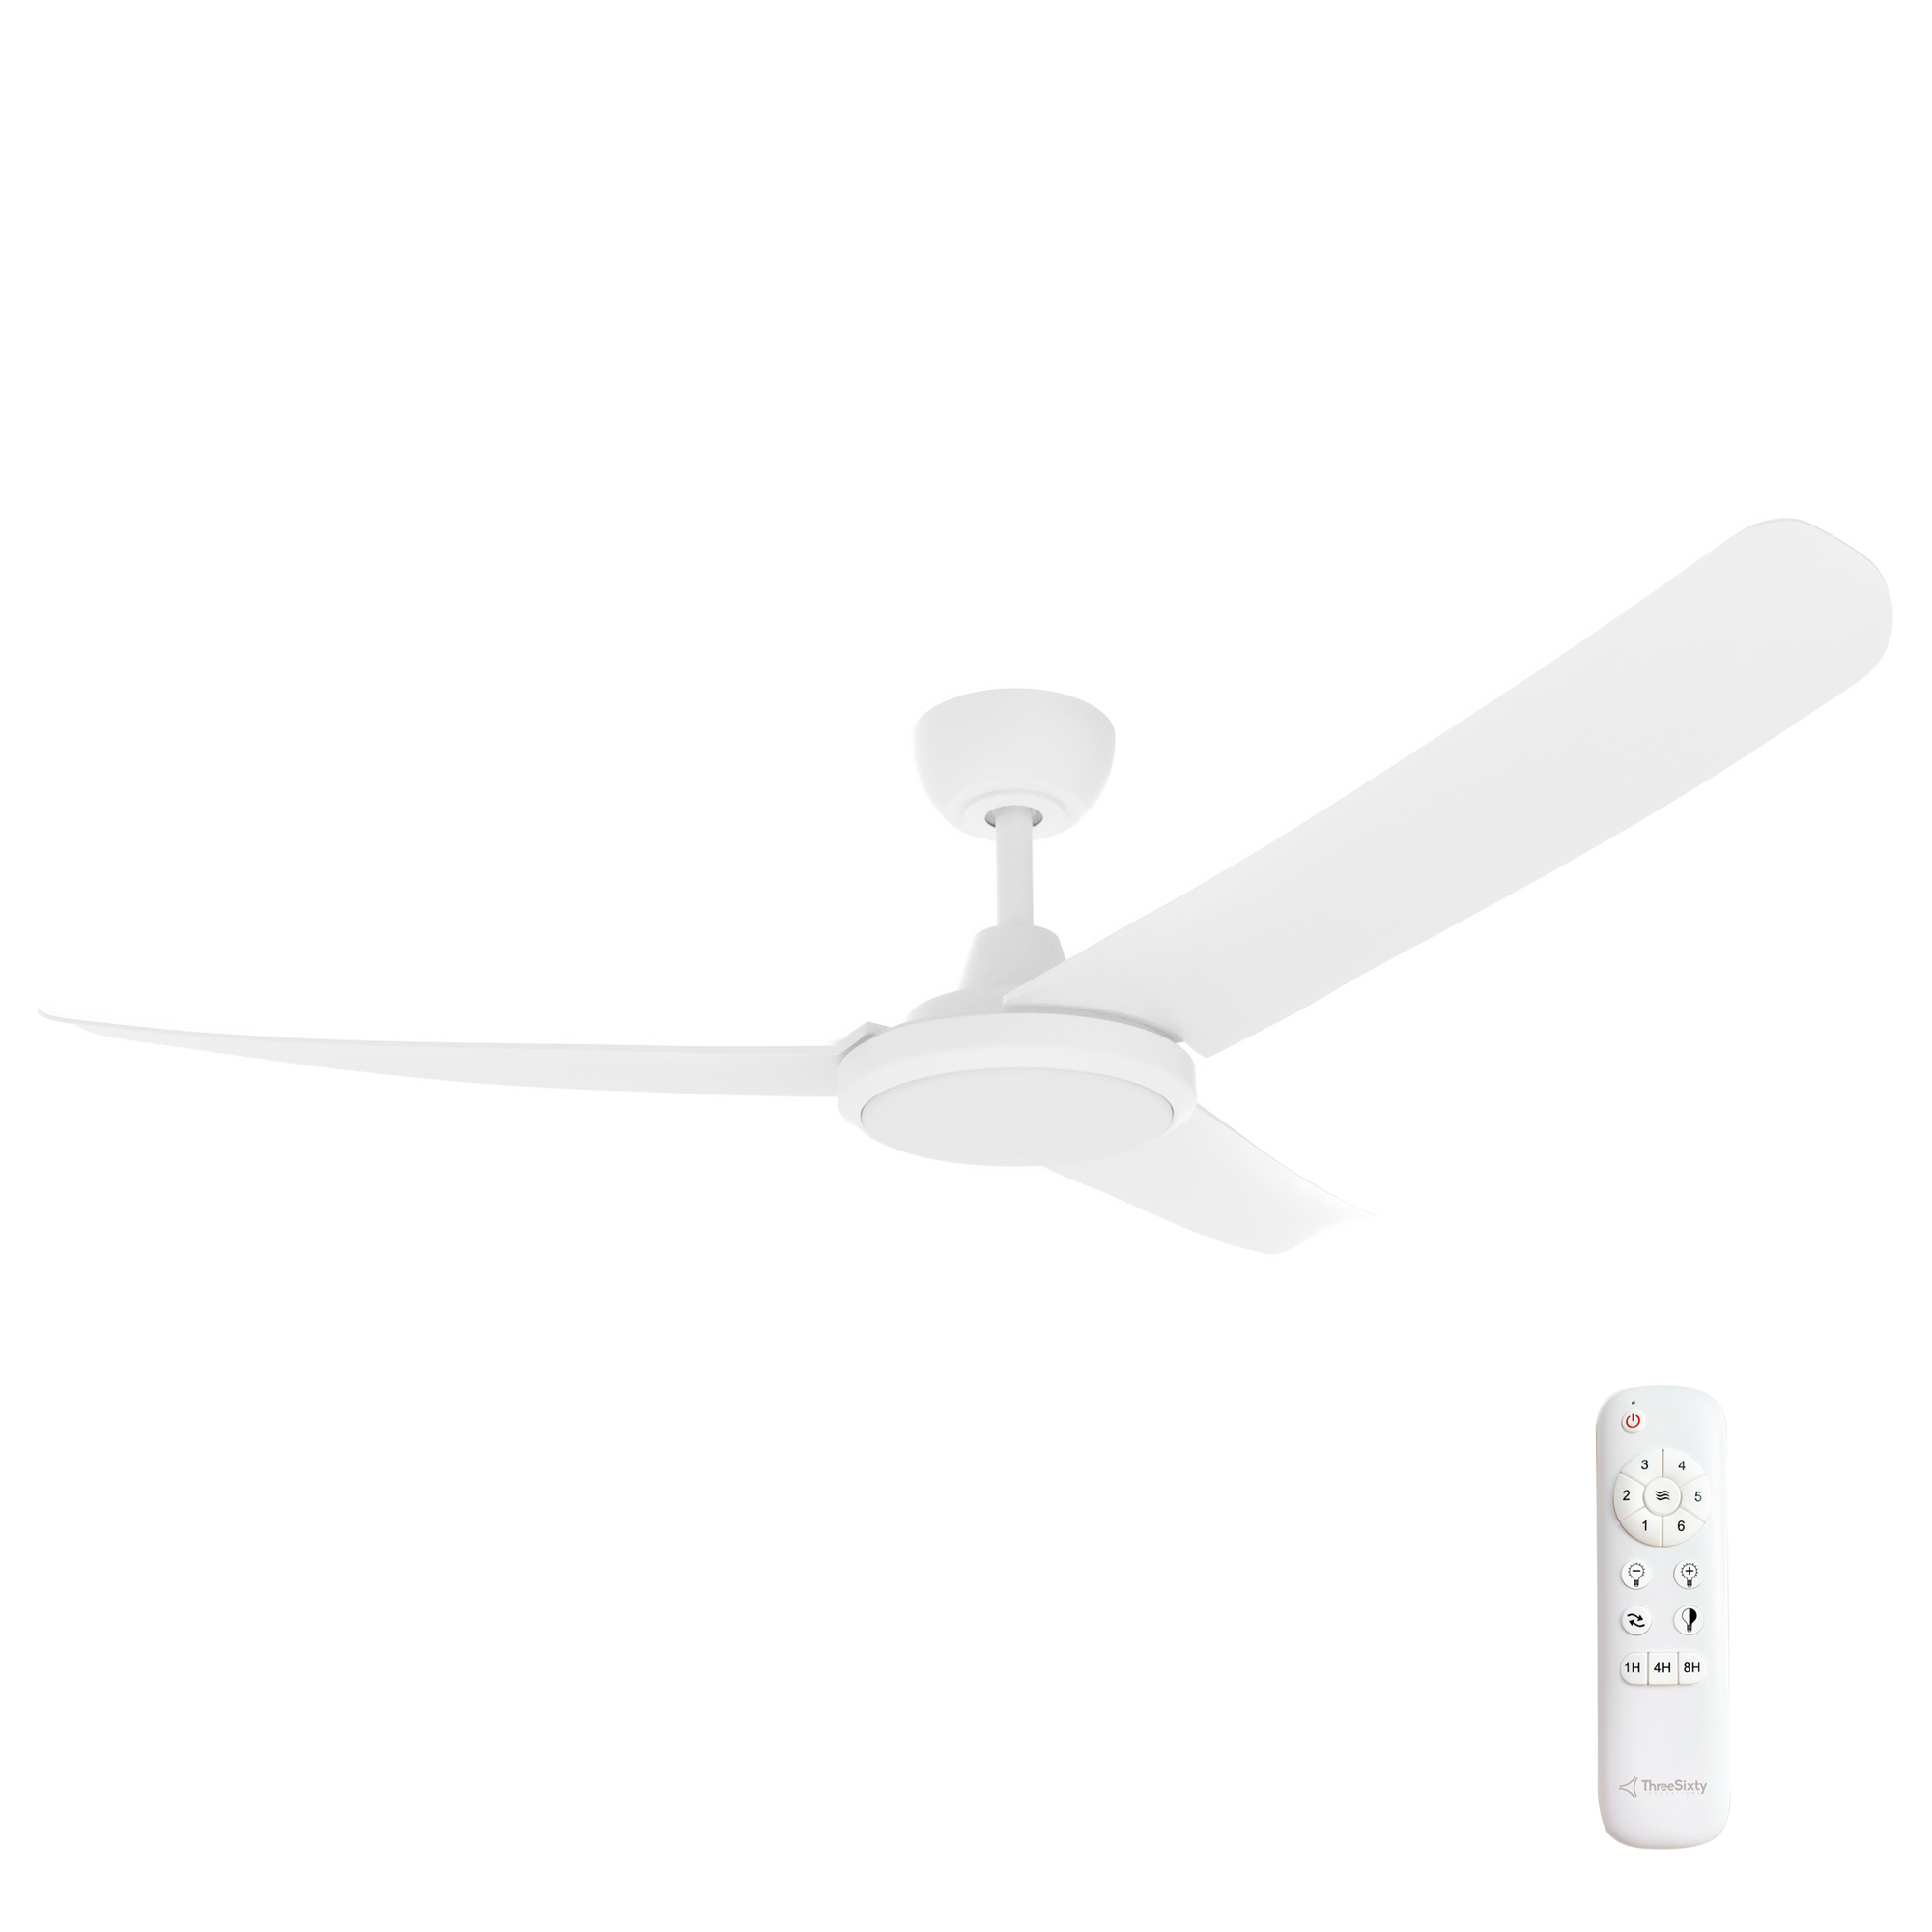 52" FlatJET DC Ceiling Fan in Matte White with 24W Dimmable CCT LED Light (3 Blades)